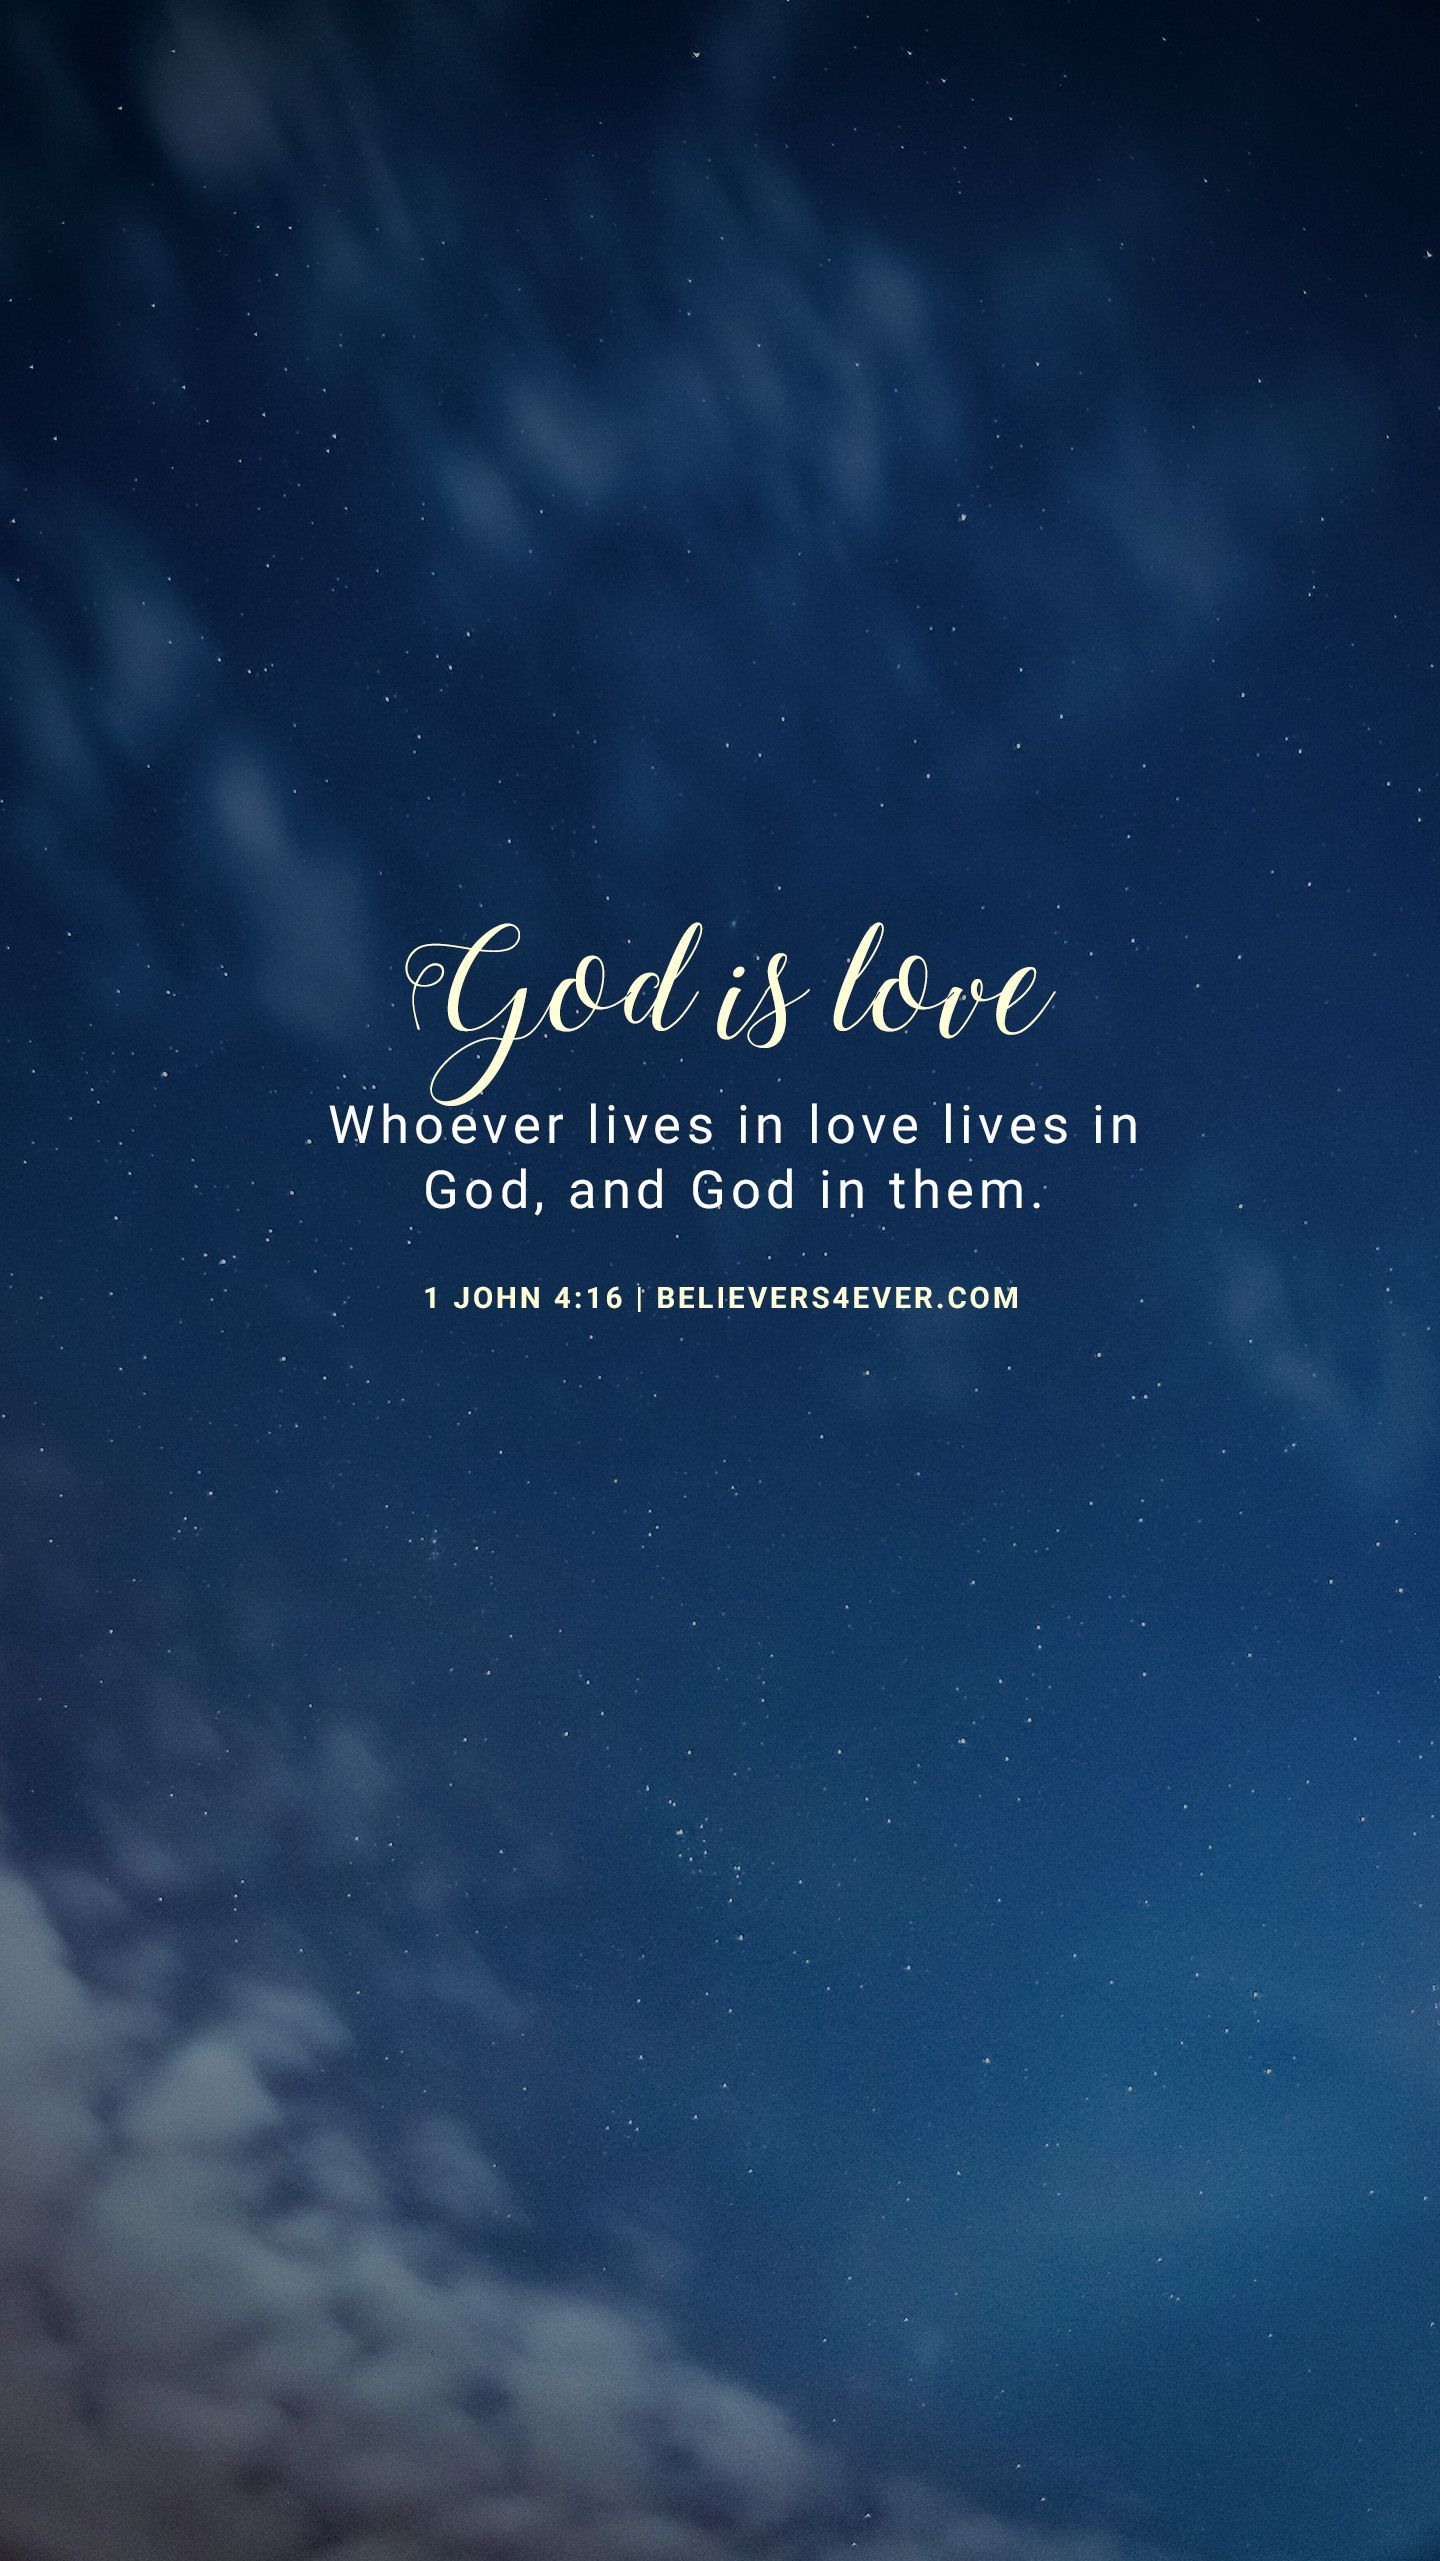 God Is Good Wallpapers - Wallpaper Cave